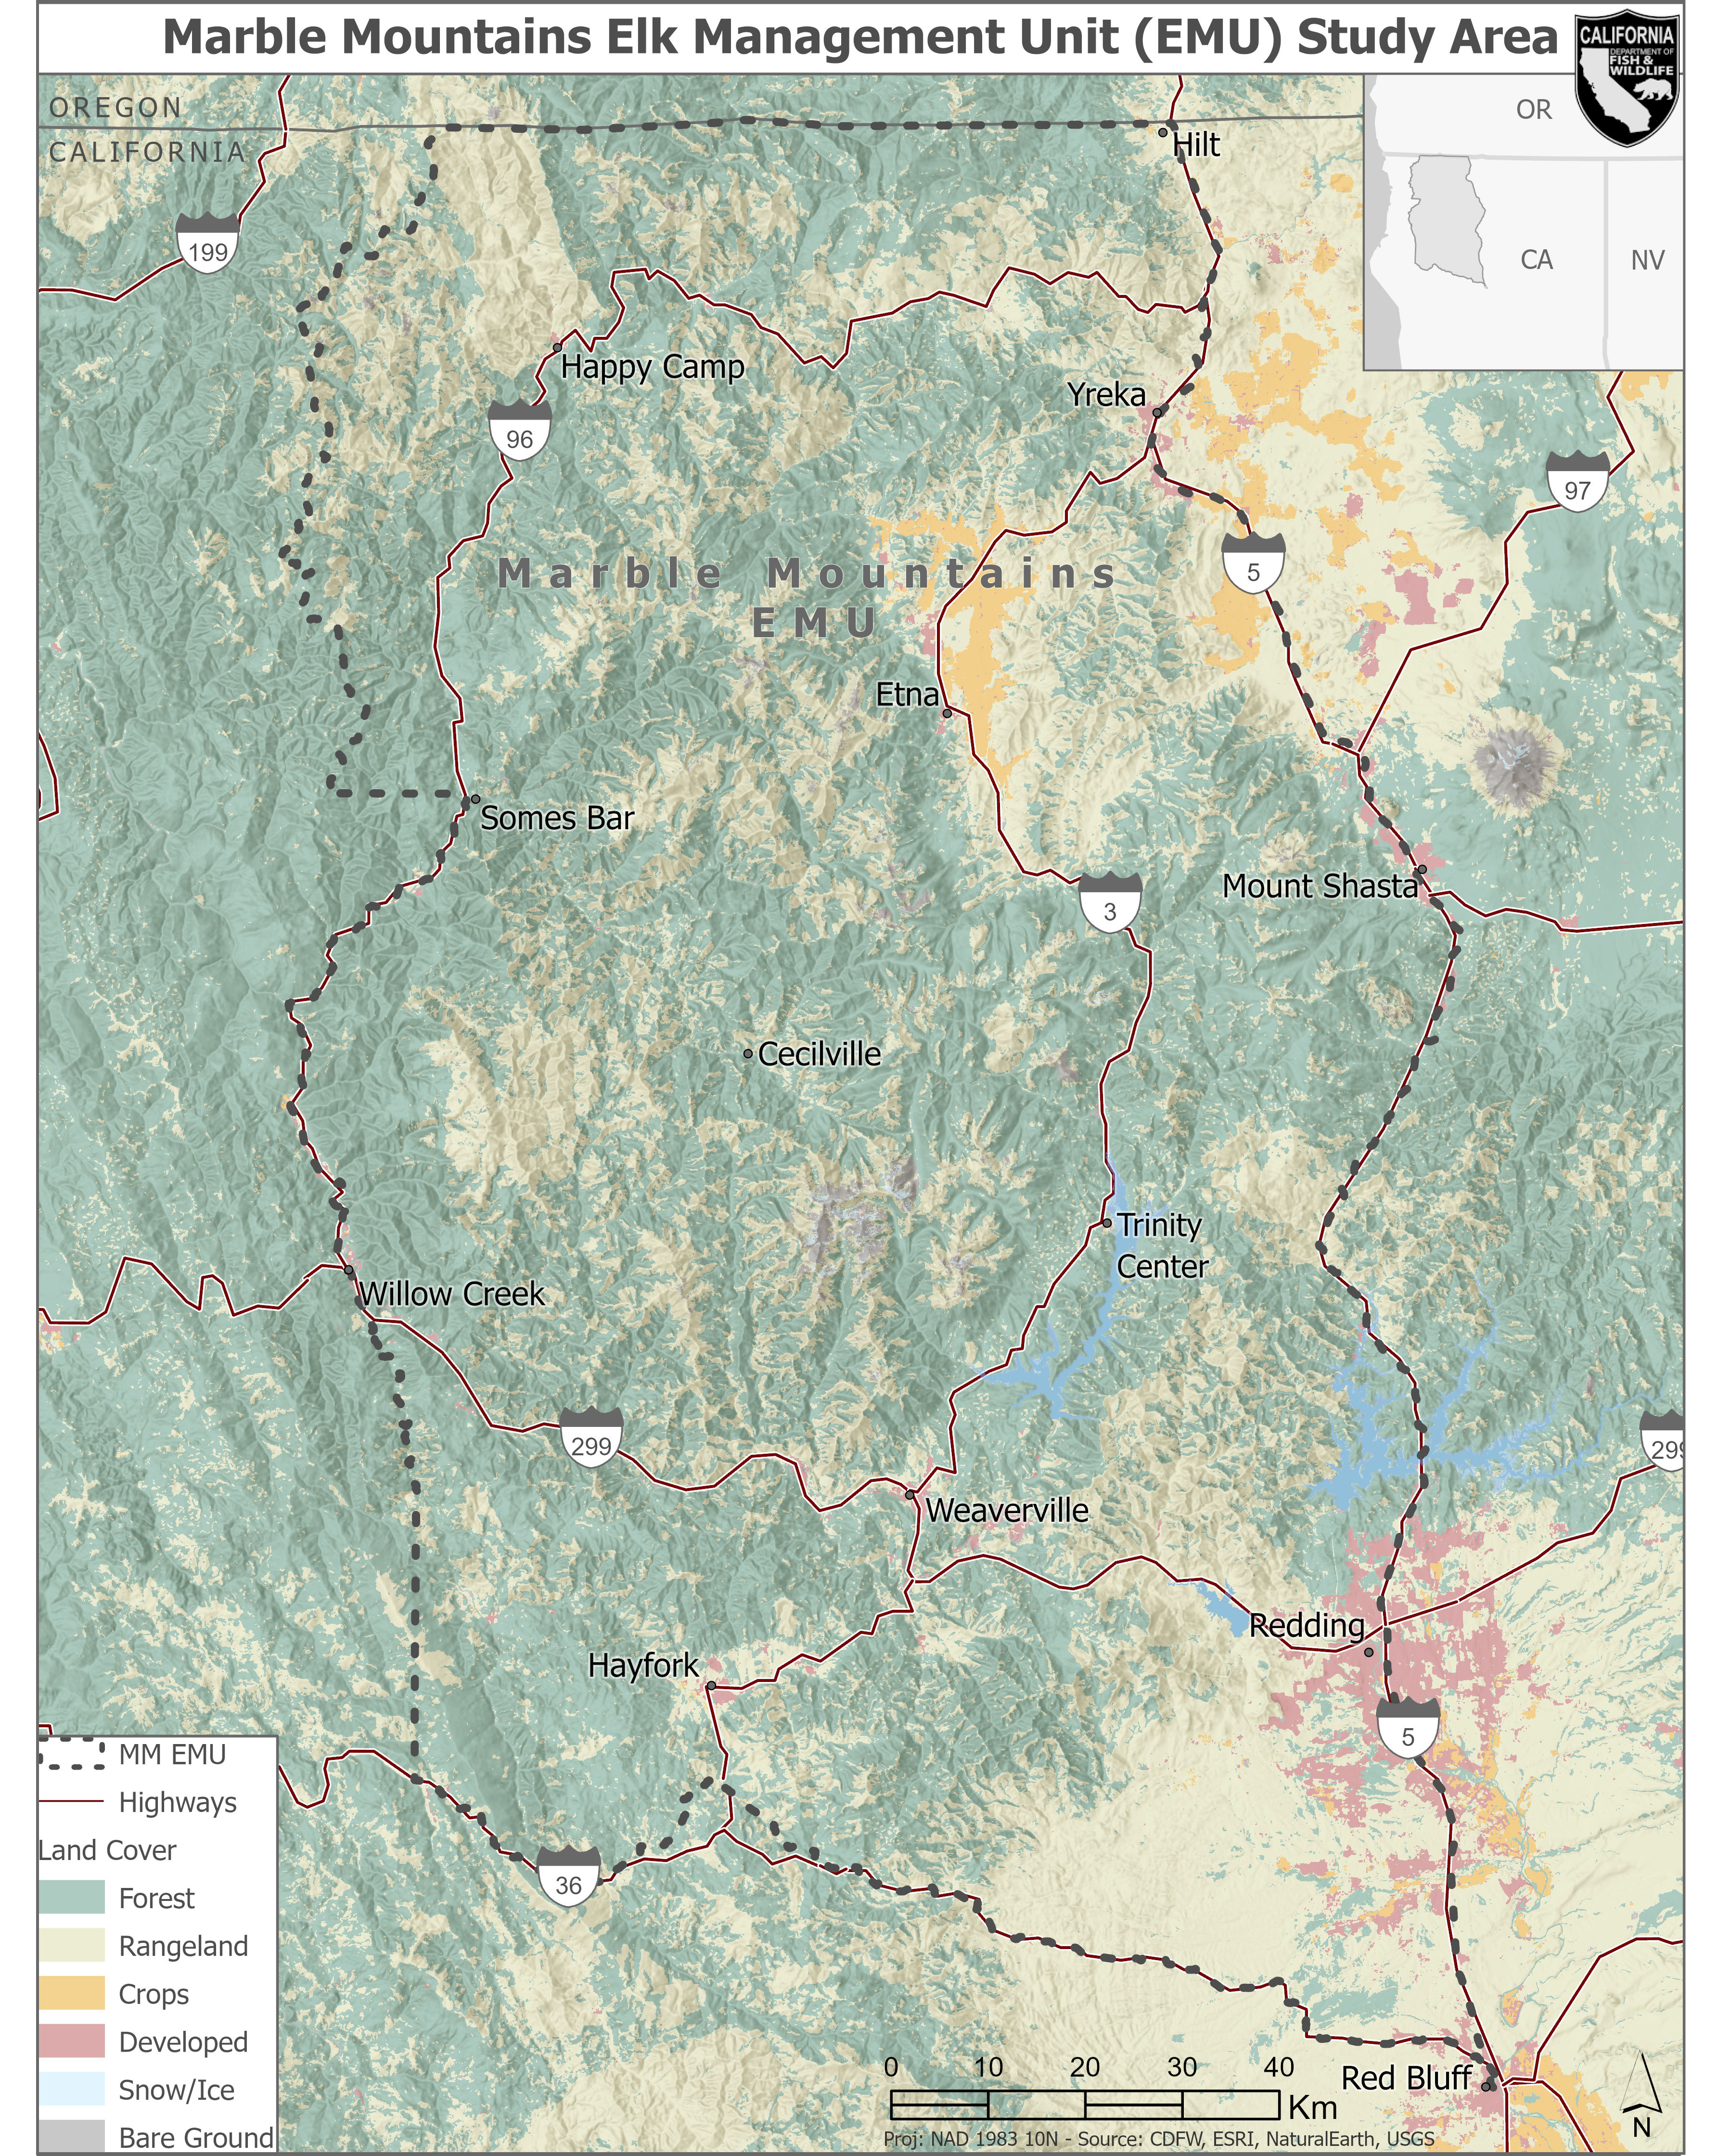 The Marble Mountains Elk Management Unit study area with major land cover types, located in portions of Humboldt, Shasta, Siskiyou, Tehama, and Trinity counties in the Klamath Mountains of northern California, USA.